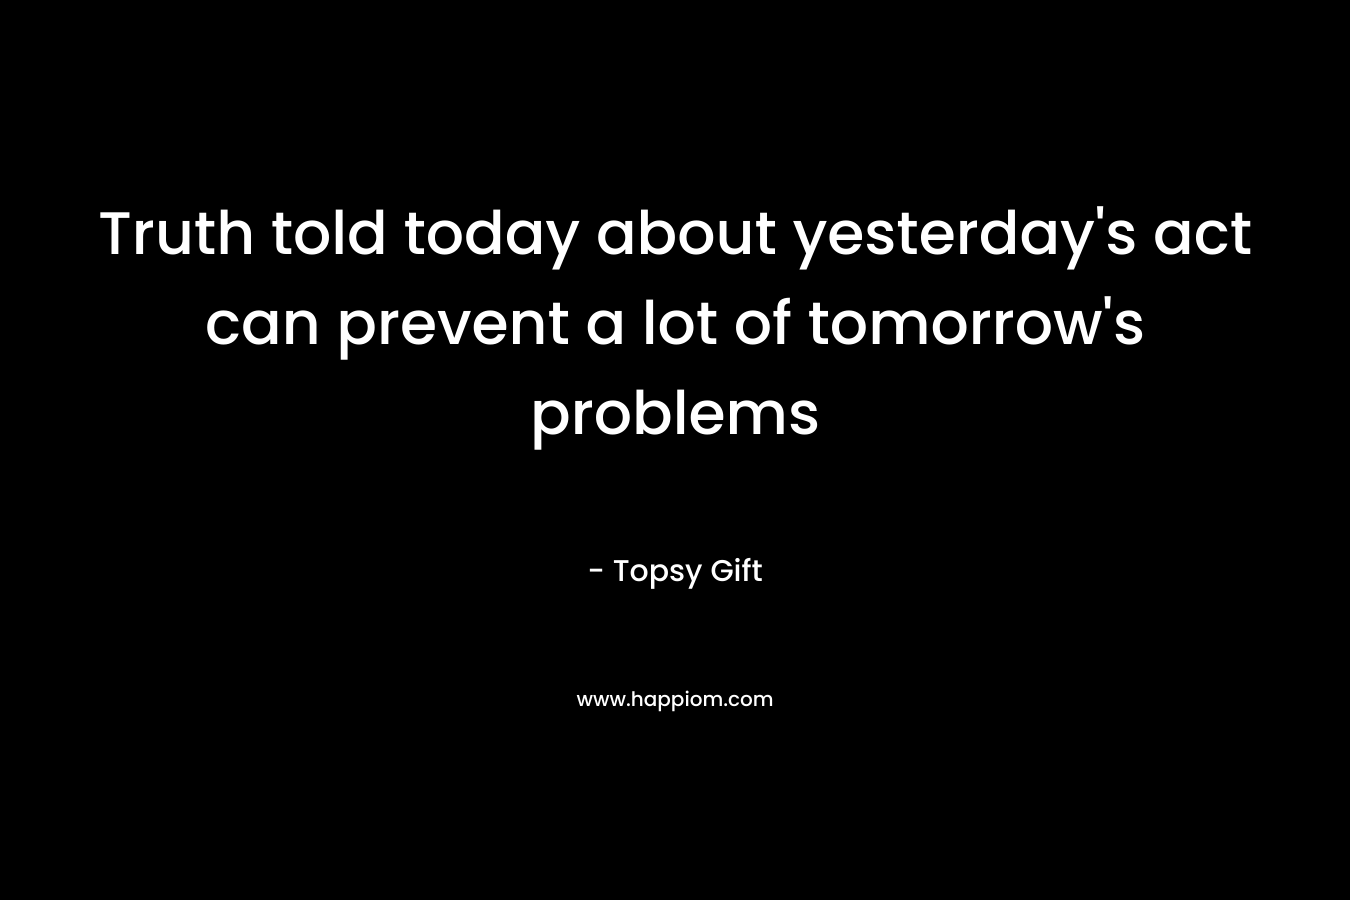 Truth told today about yesterday’s act can prevent a lot of tomorrow’s problems – Topsy Gift